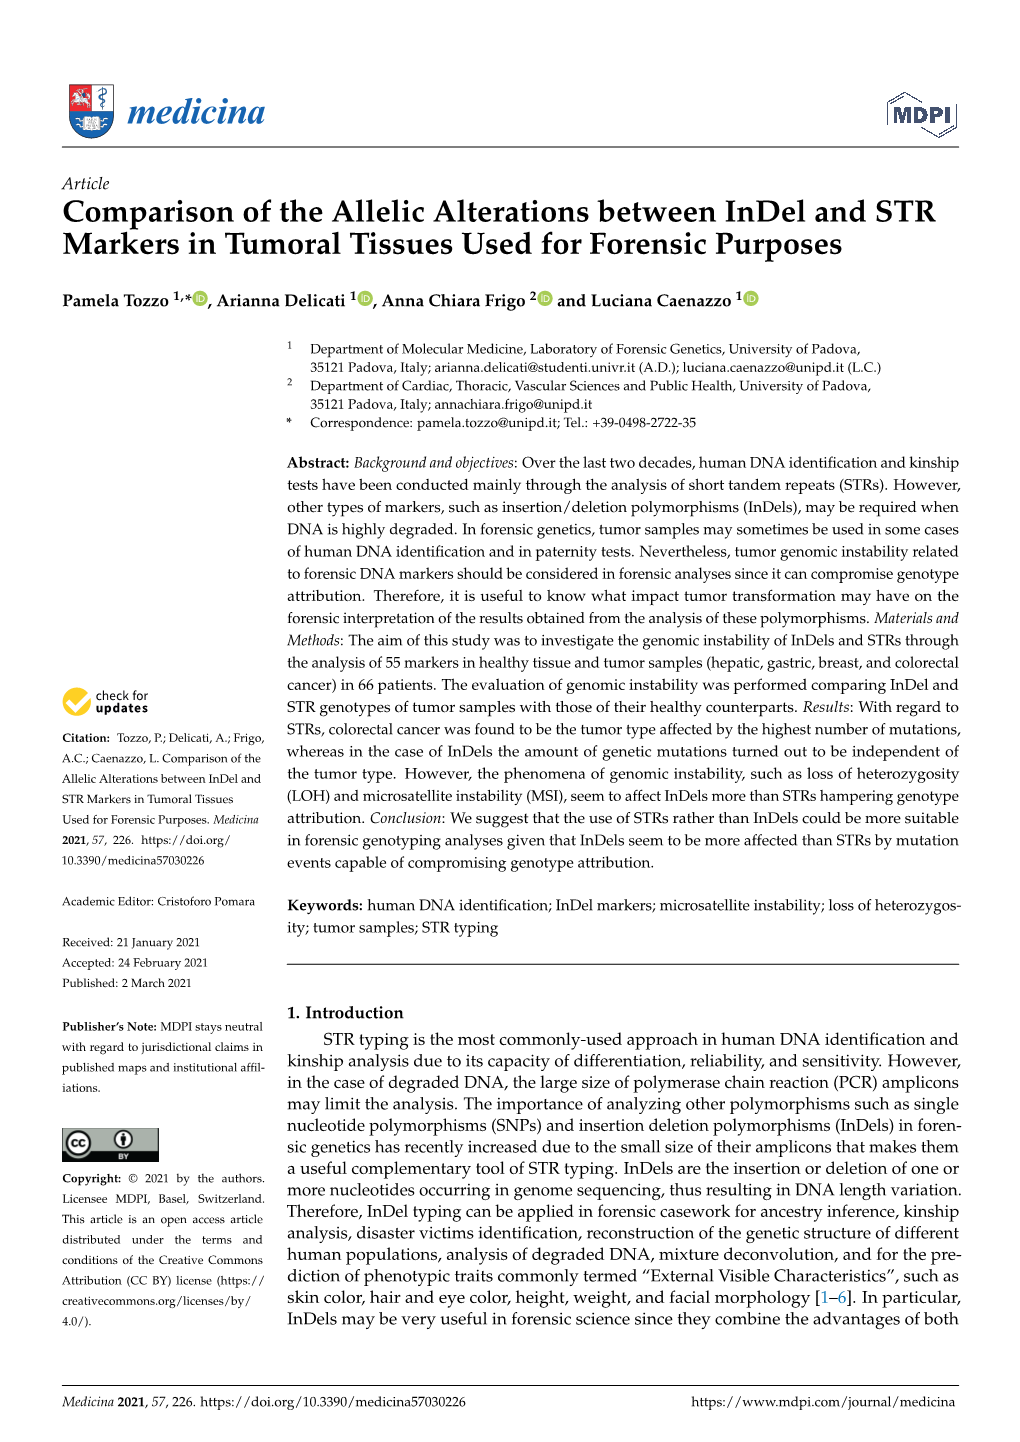 Comparison of the Allelic Alterations Between Indel and STR Markers in Tumoral Tissues Used for Forensic Purposes